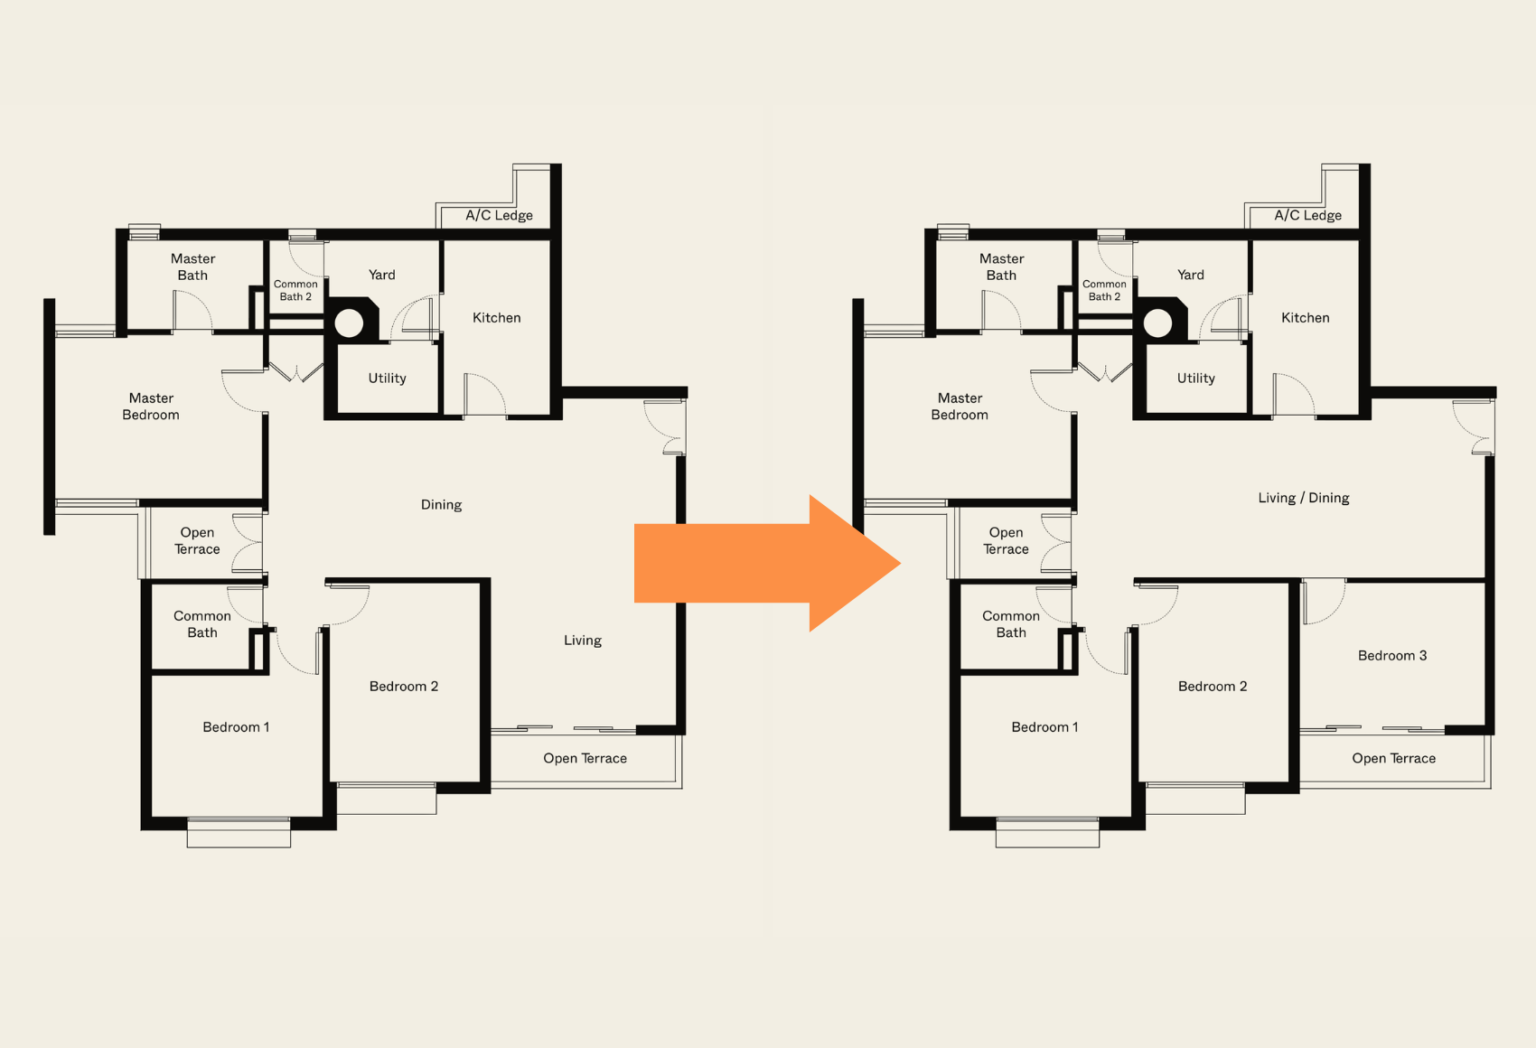 What to know before adding rooms to your condo unit